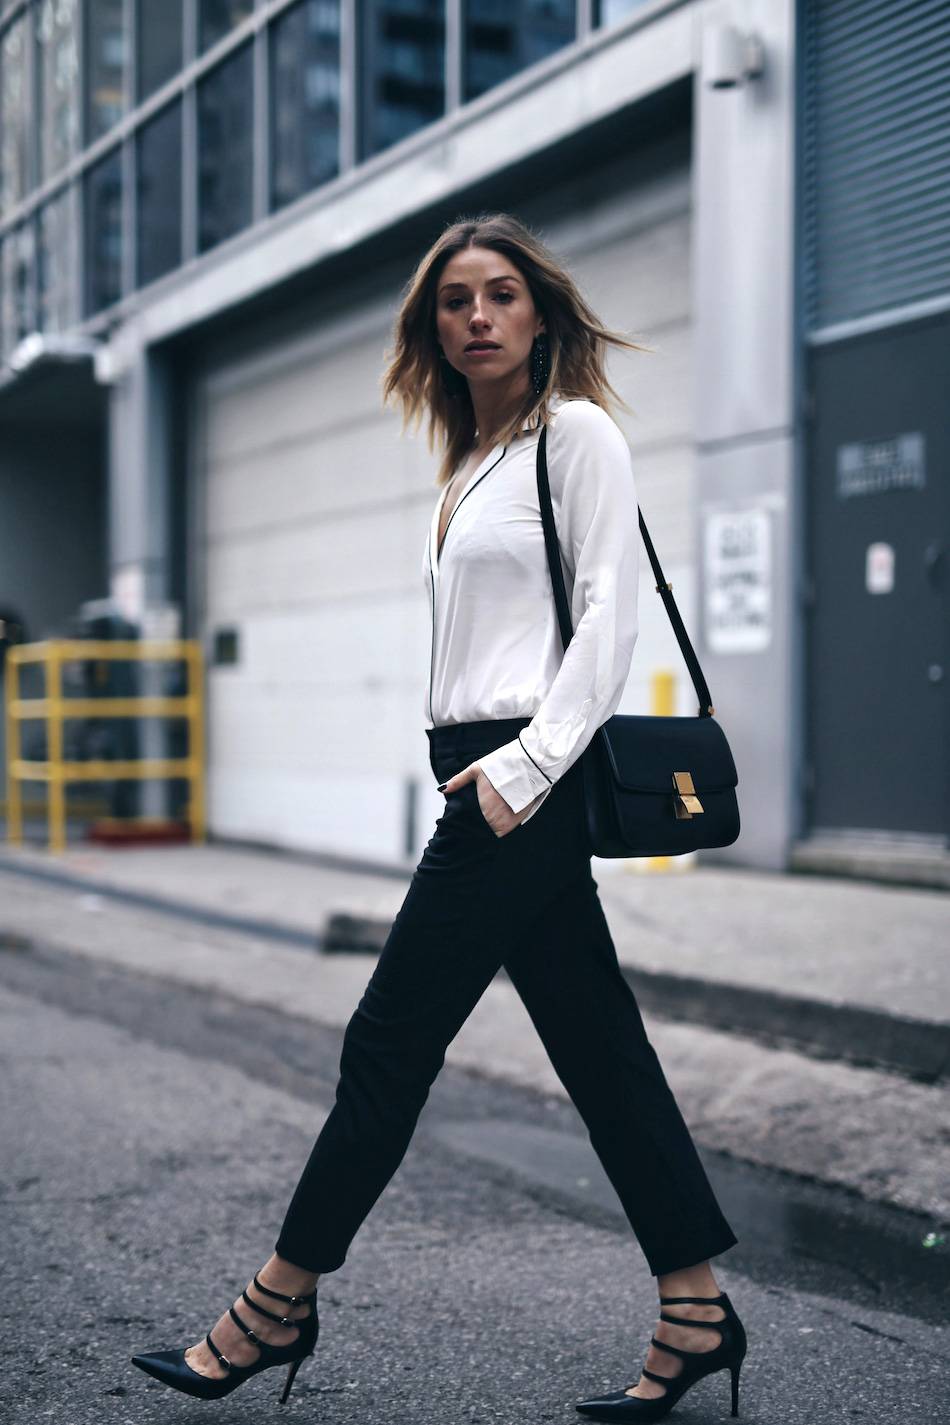 style-and-beauty-blogger-jill-lansky-of-the-august-diaries-new-years-eve-outfits-2016-in-an-express-blouse-trousers-marion-parke-heels-and-a-celine-box-bag